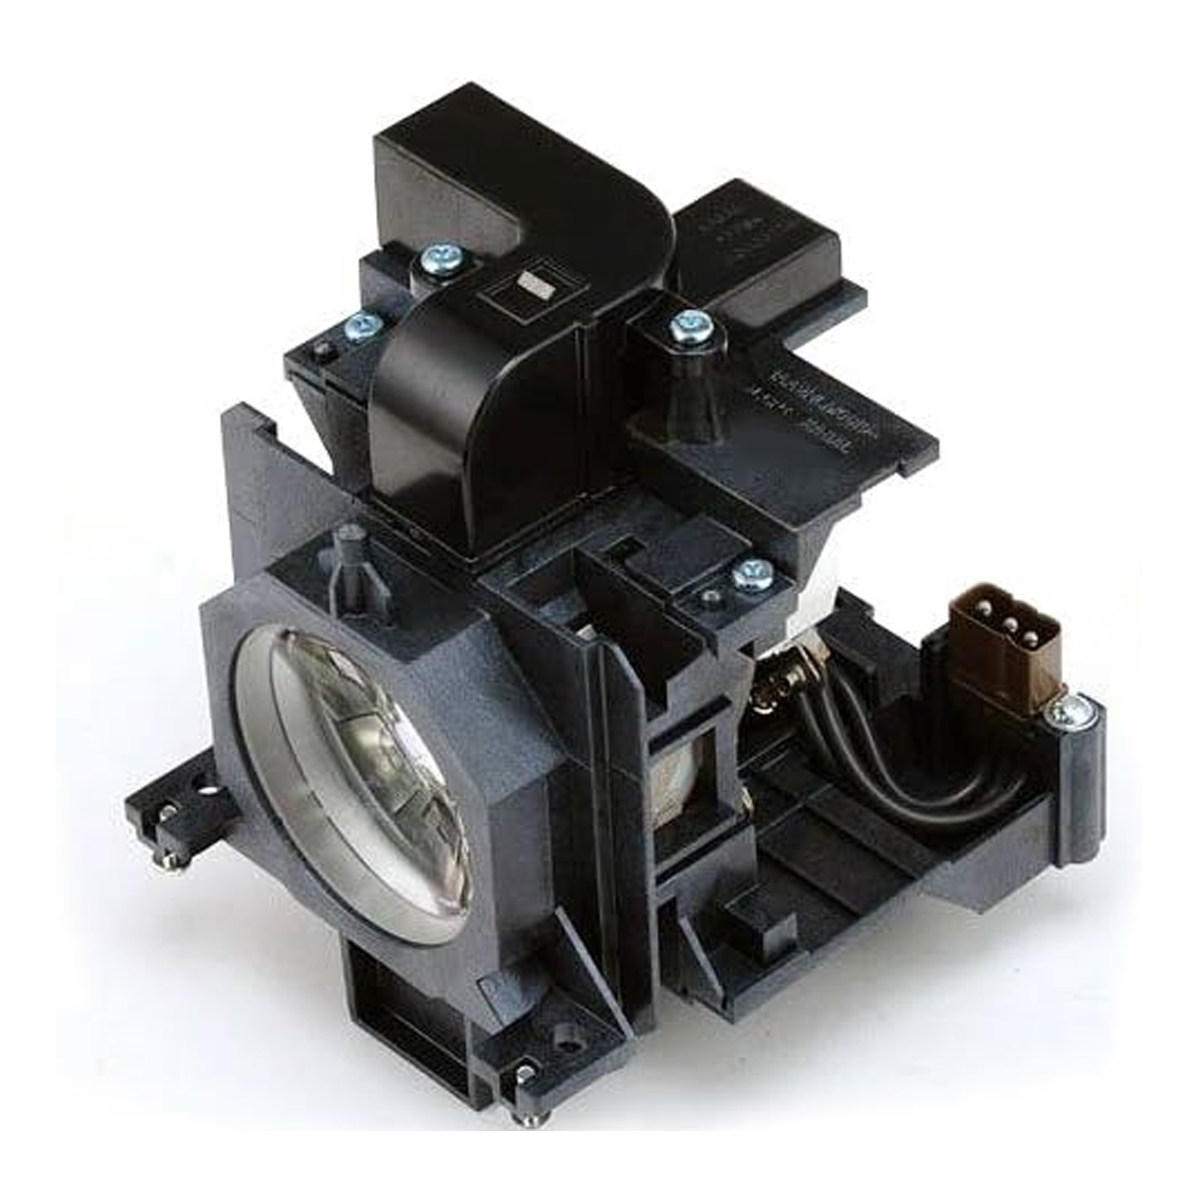 Replacement Projector lamp POA-LMP136 For SANYO PLC-ZM5000/L